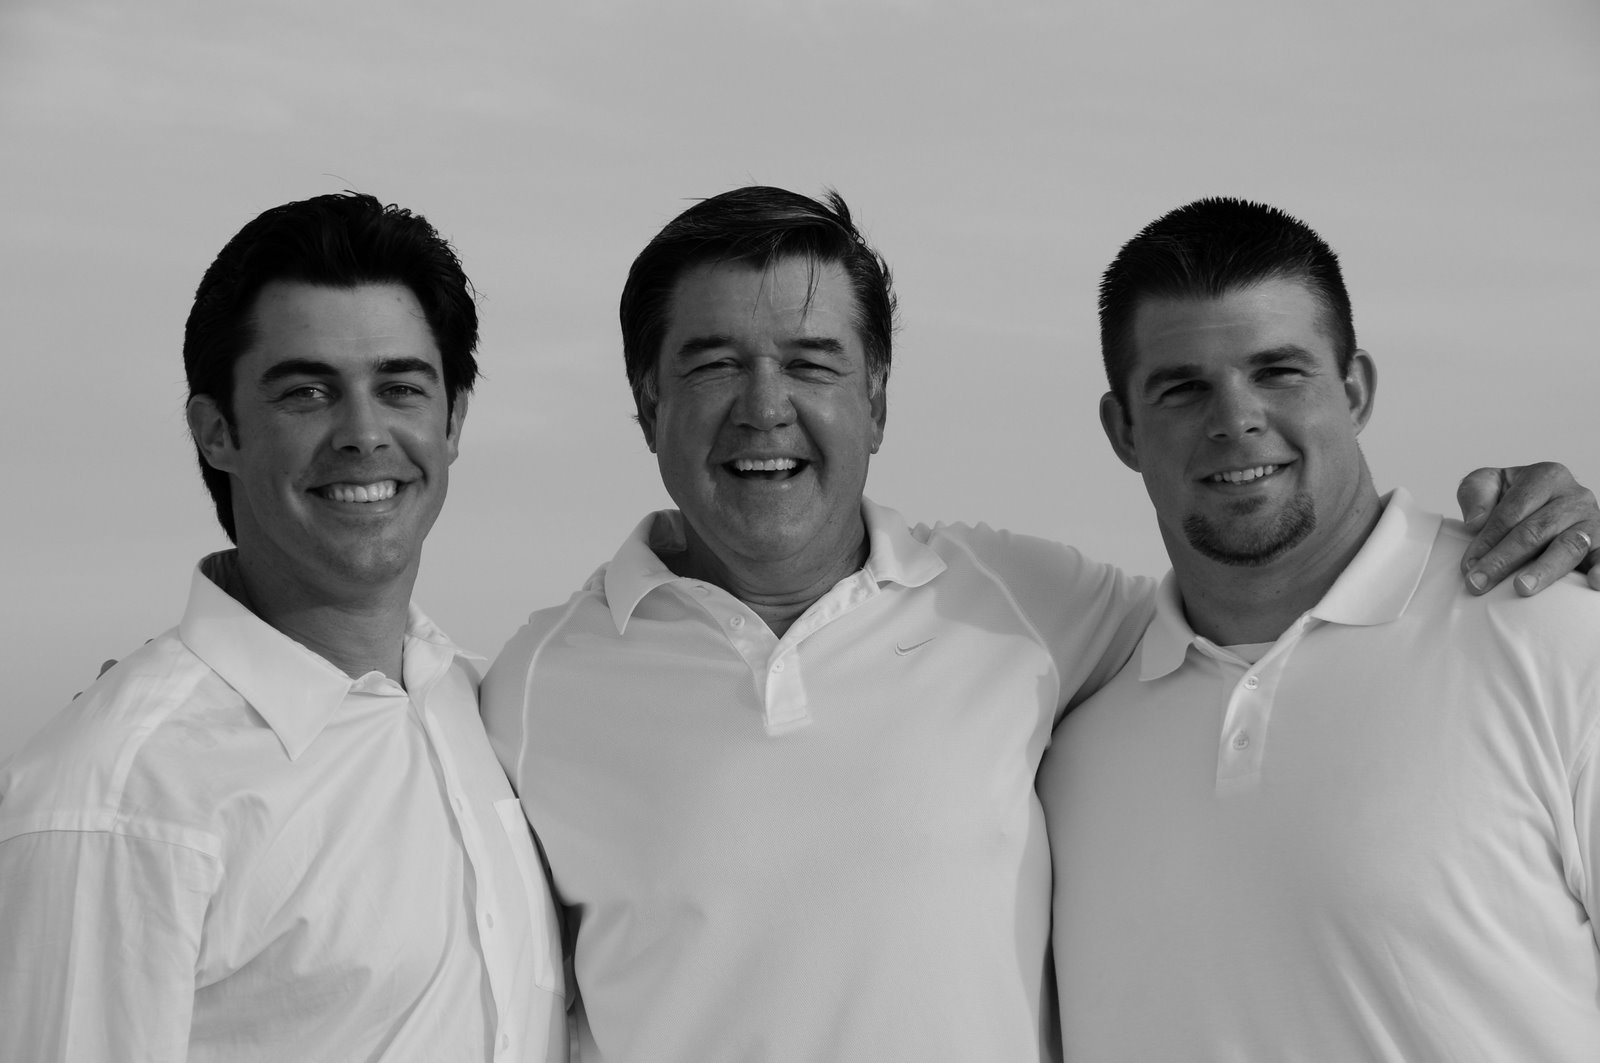 [Perry+Family+Black+and+White+(141).jpg]